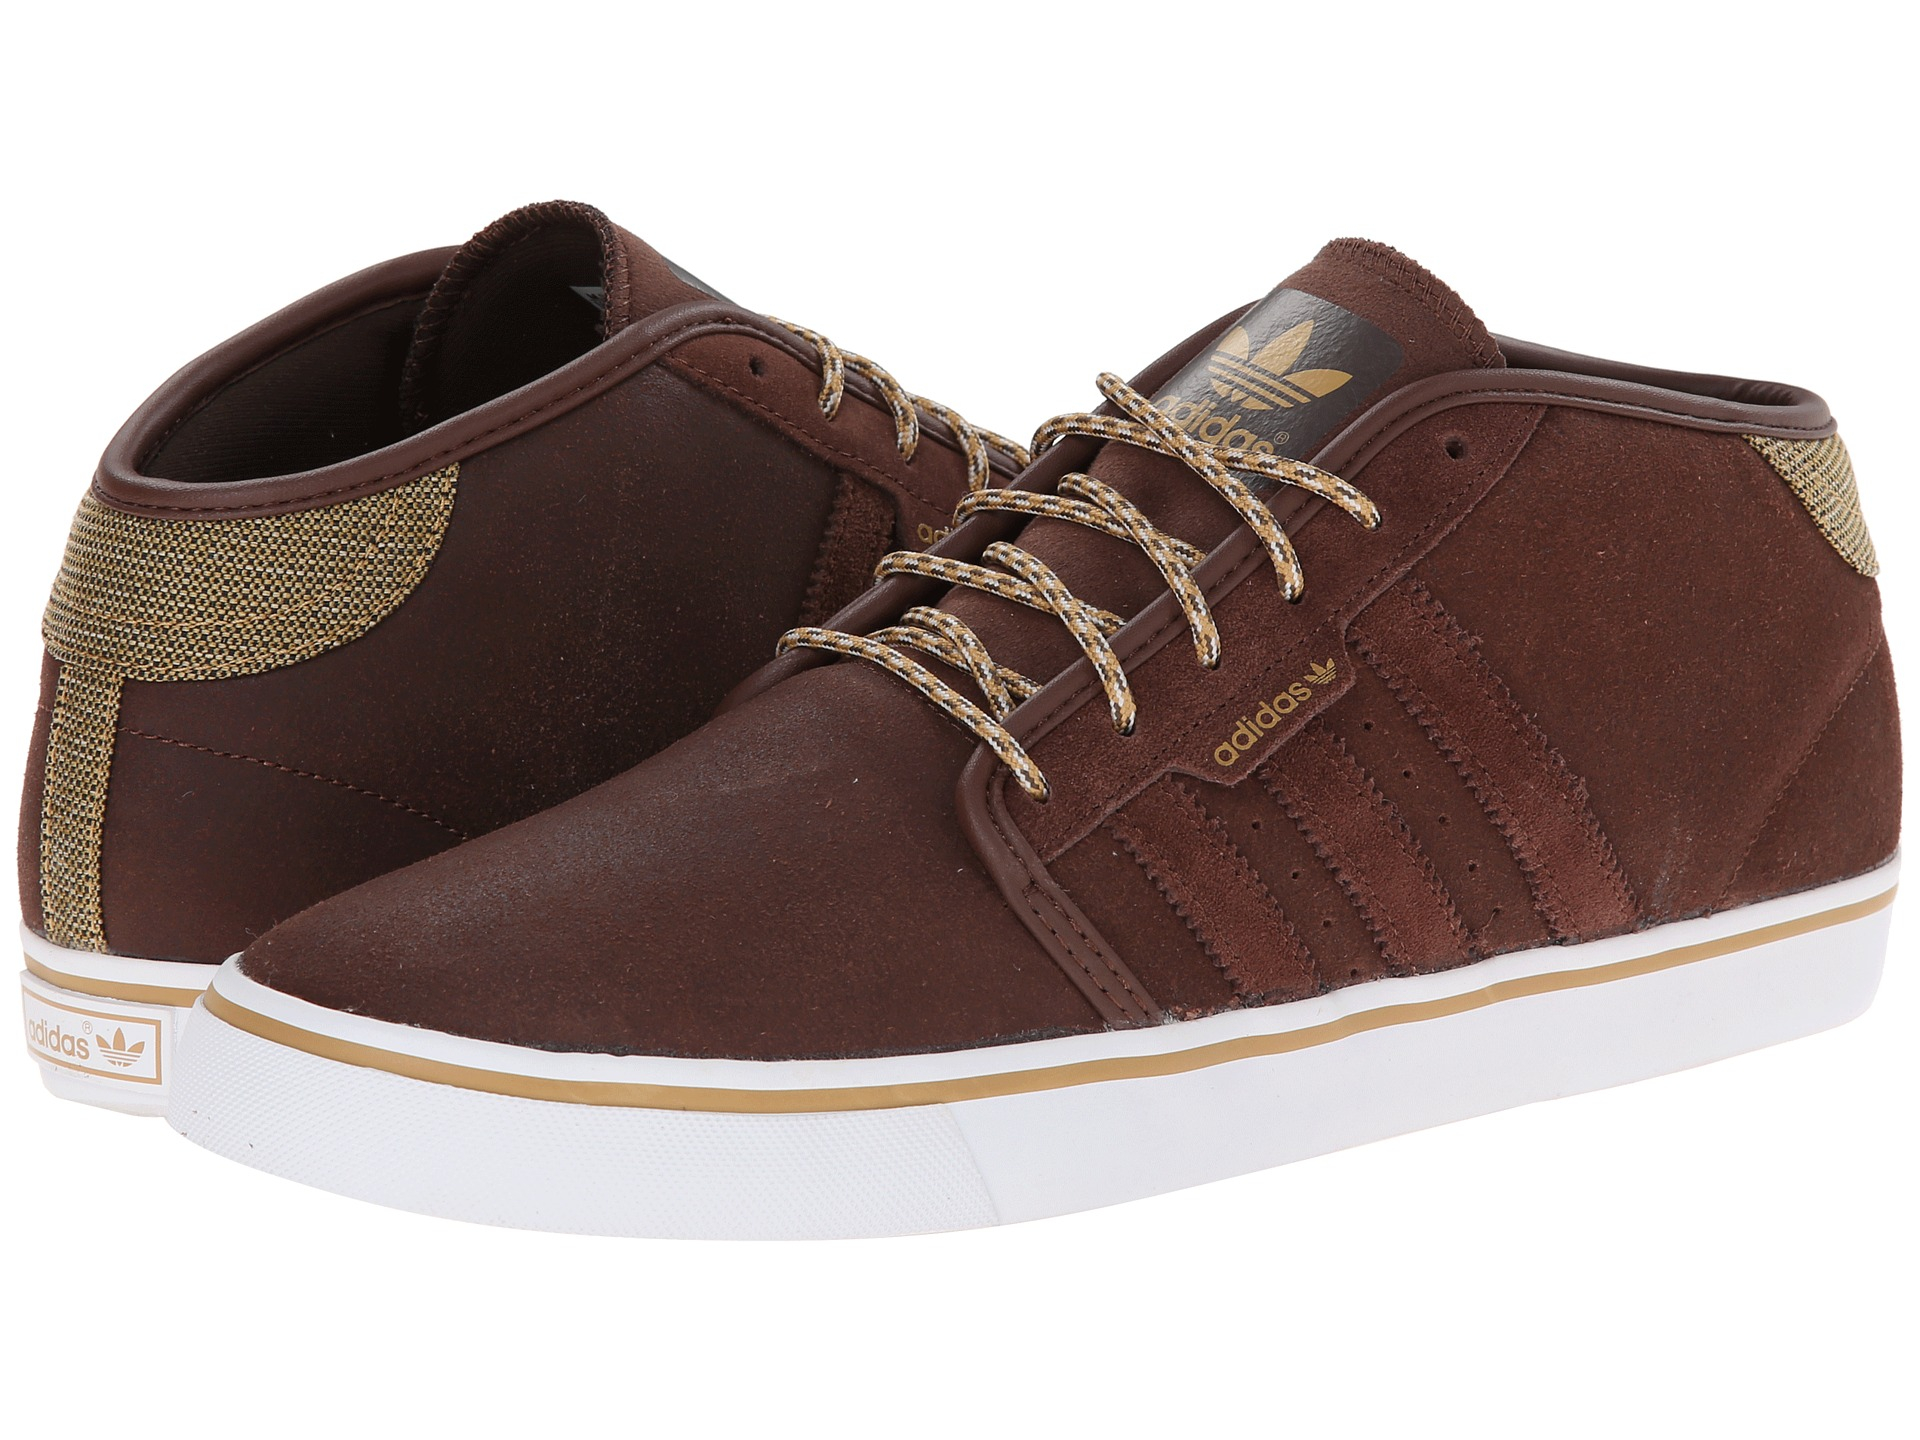 adidas Seeley Mid in Brown for Men - Lyst